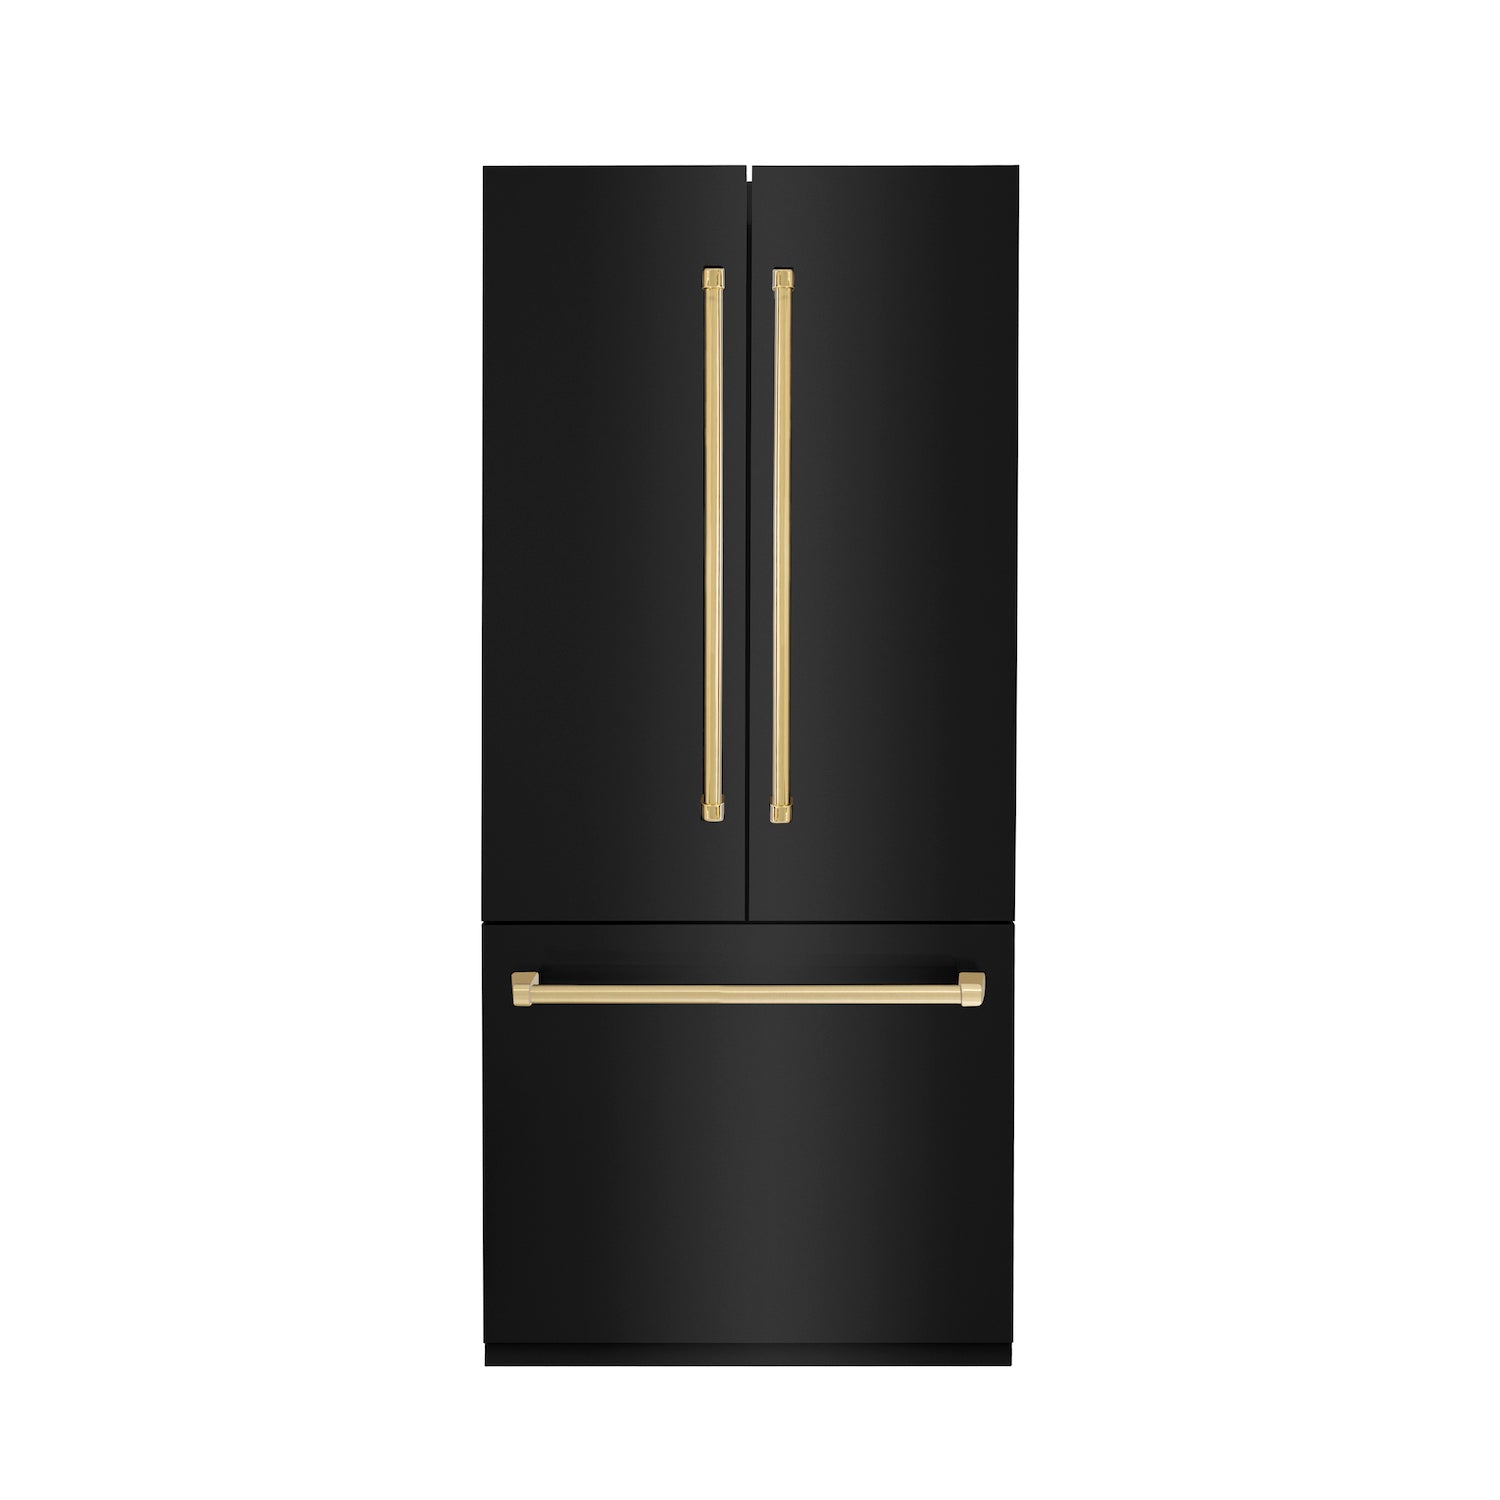 ZLINE Autograph Edition 36 in. 19.6 cu. ft. Built-in 2-Door Bottom Freezer Refrigerator with Internal Water and Ice Dispenser in Black Stainless Steel with Polished Gold Accents (RBIVZ-BS-36-G) front, doors closed.